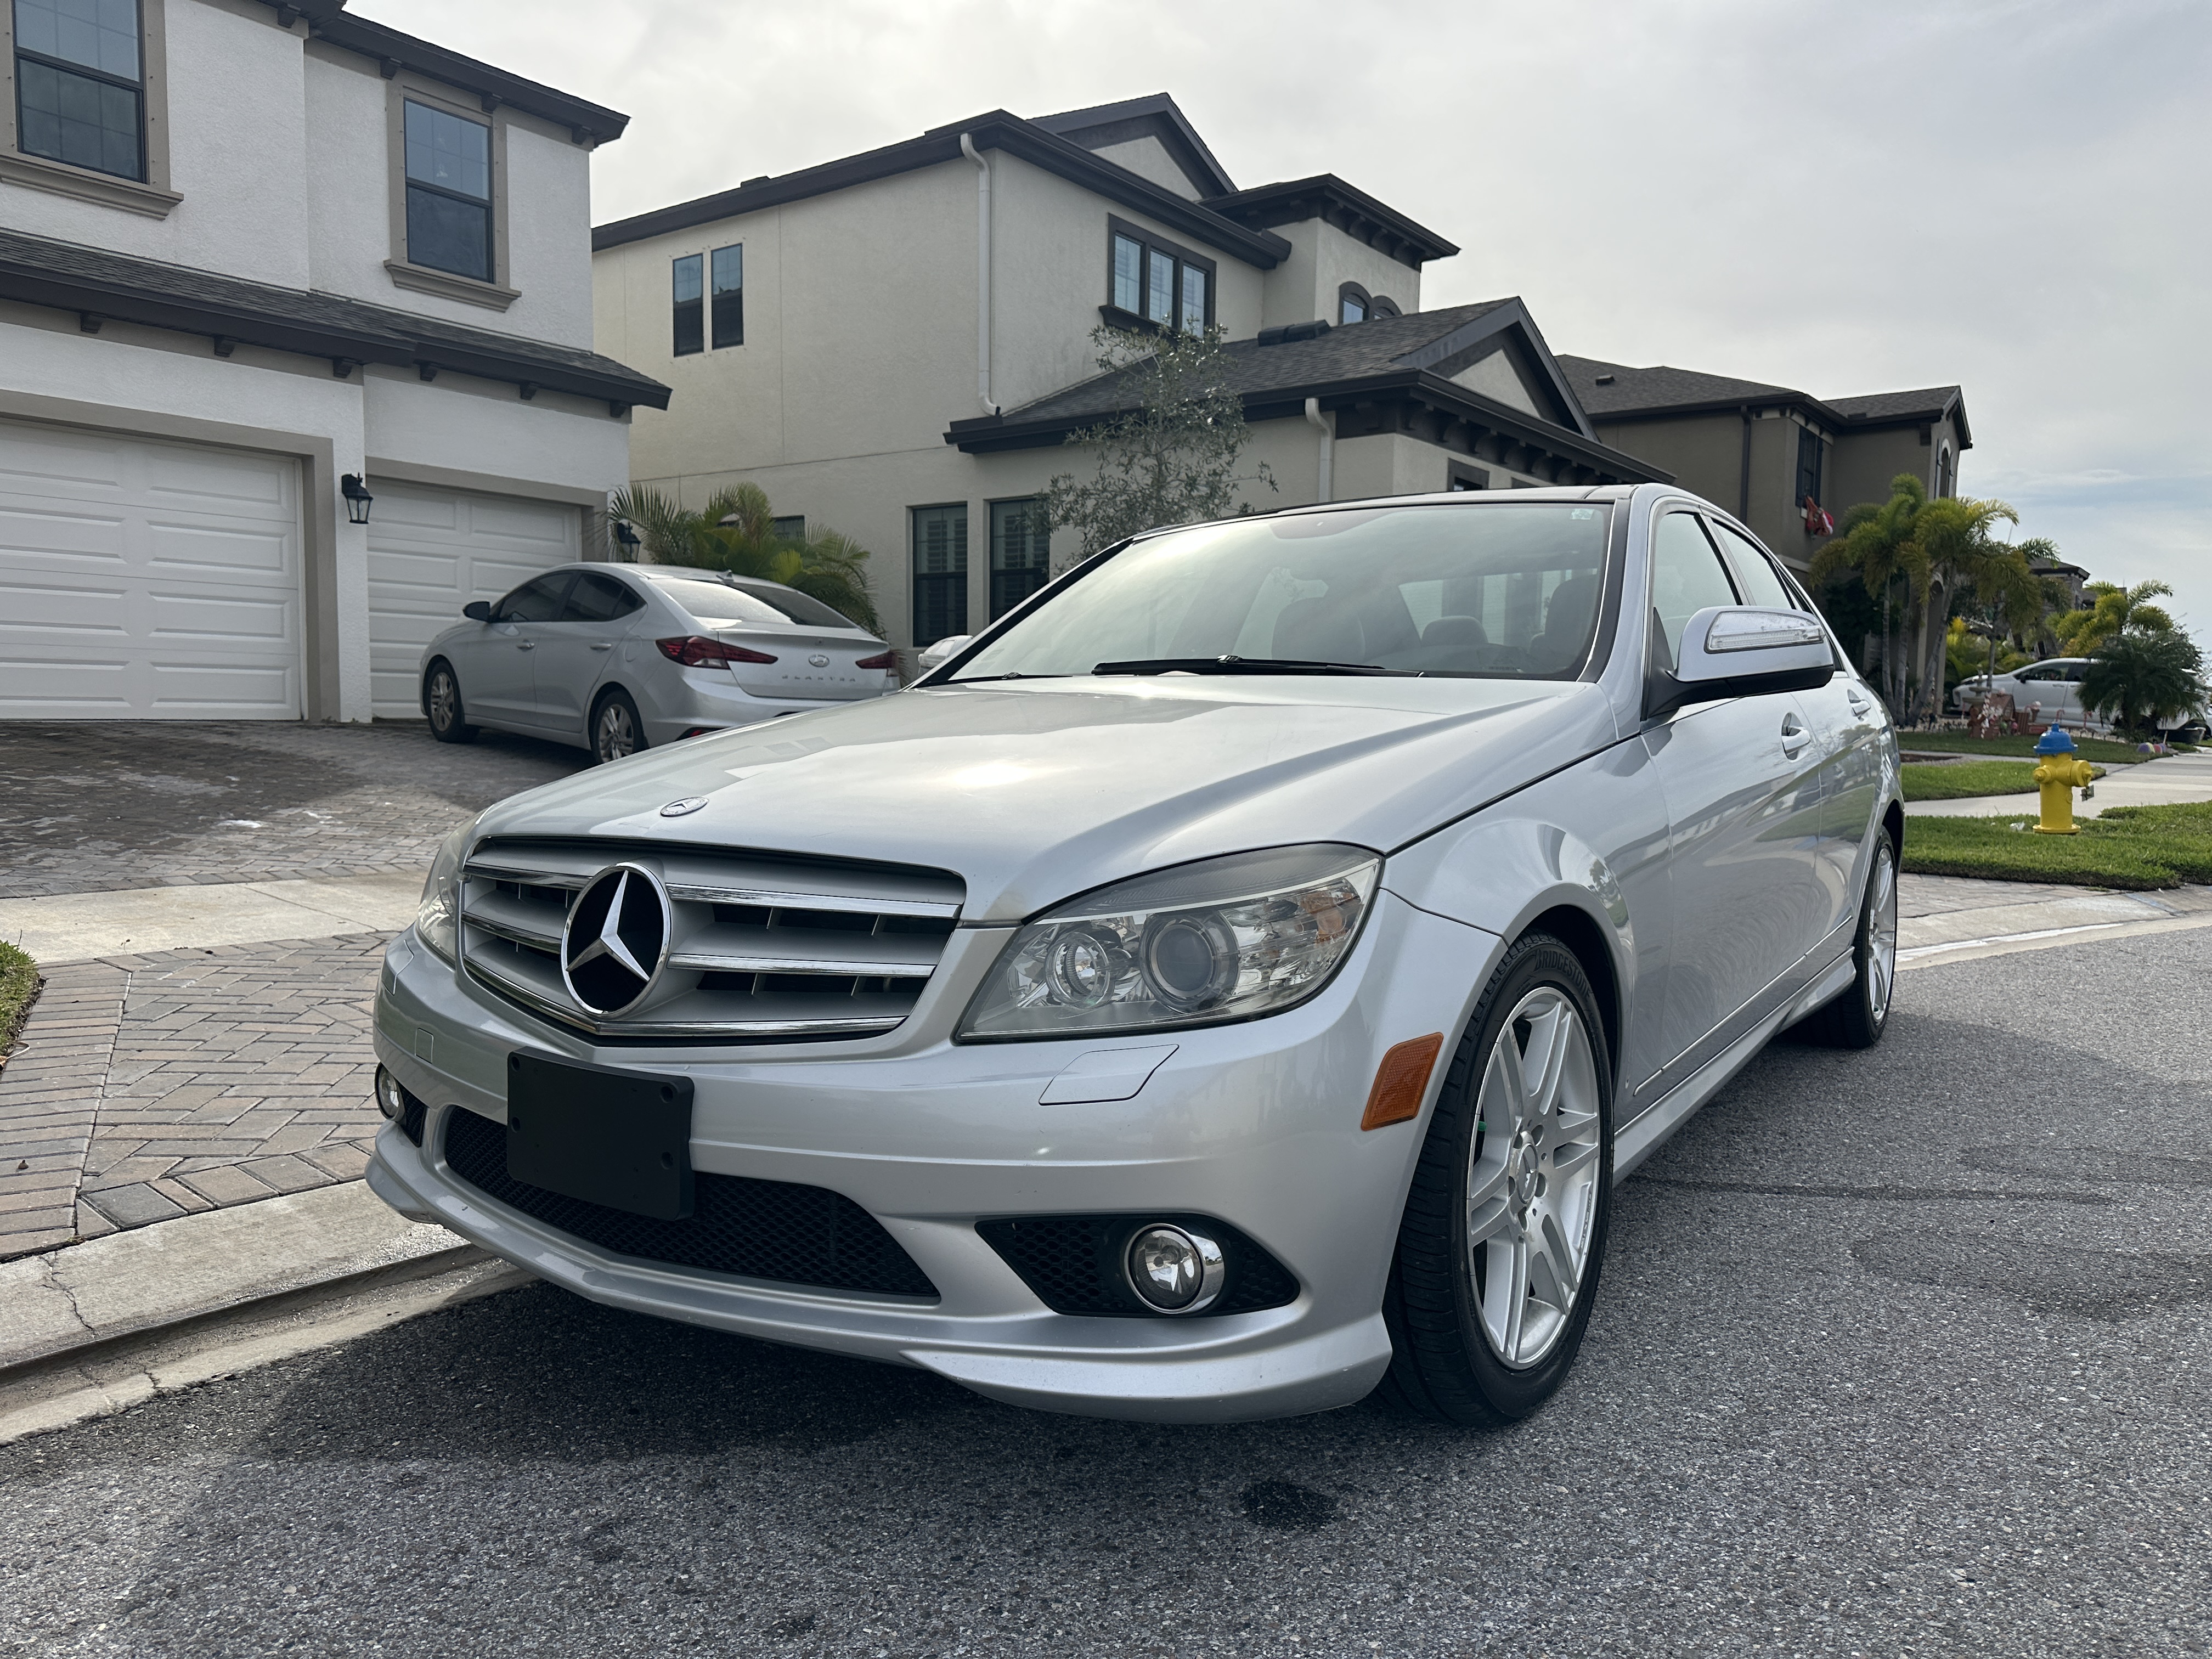 Used 2008 Mercedes-benz C-class for Sale Near Me